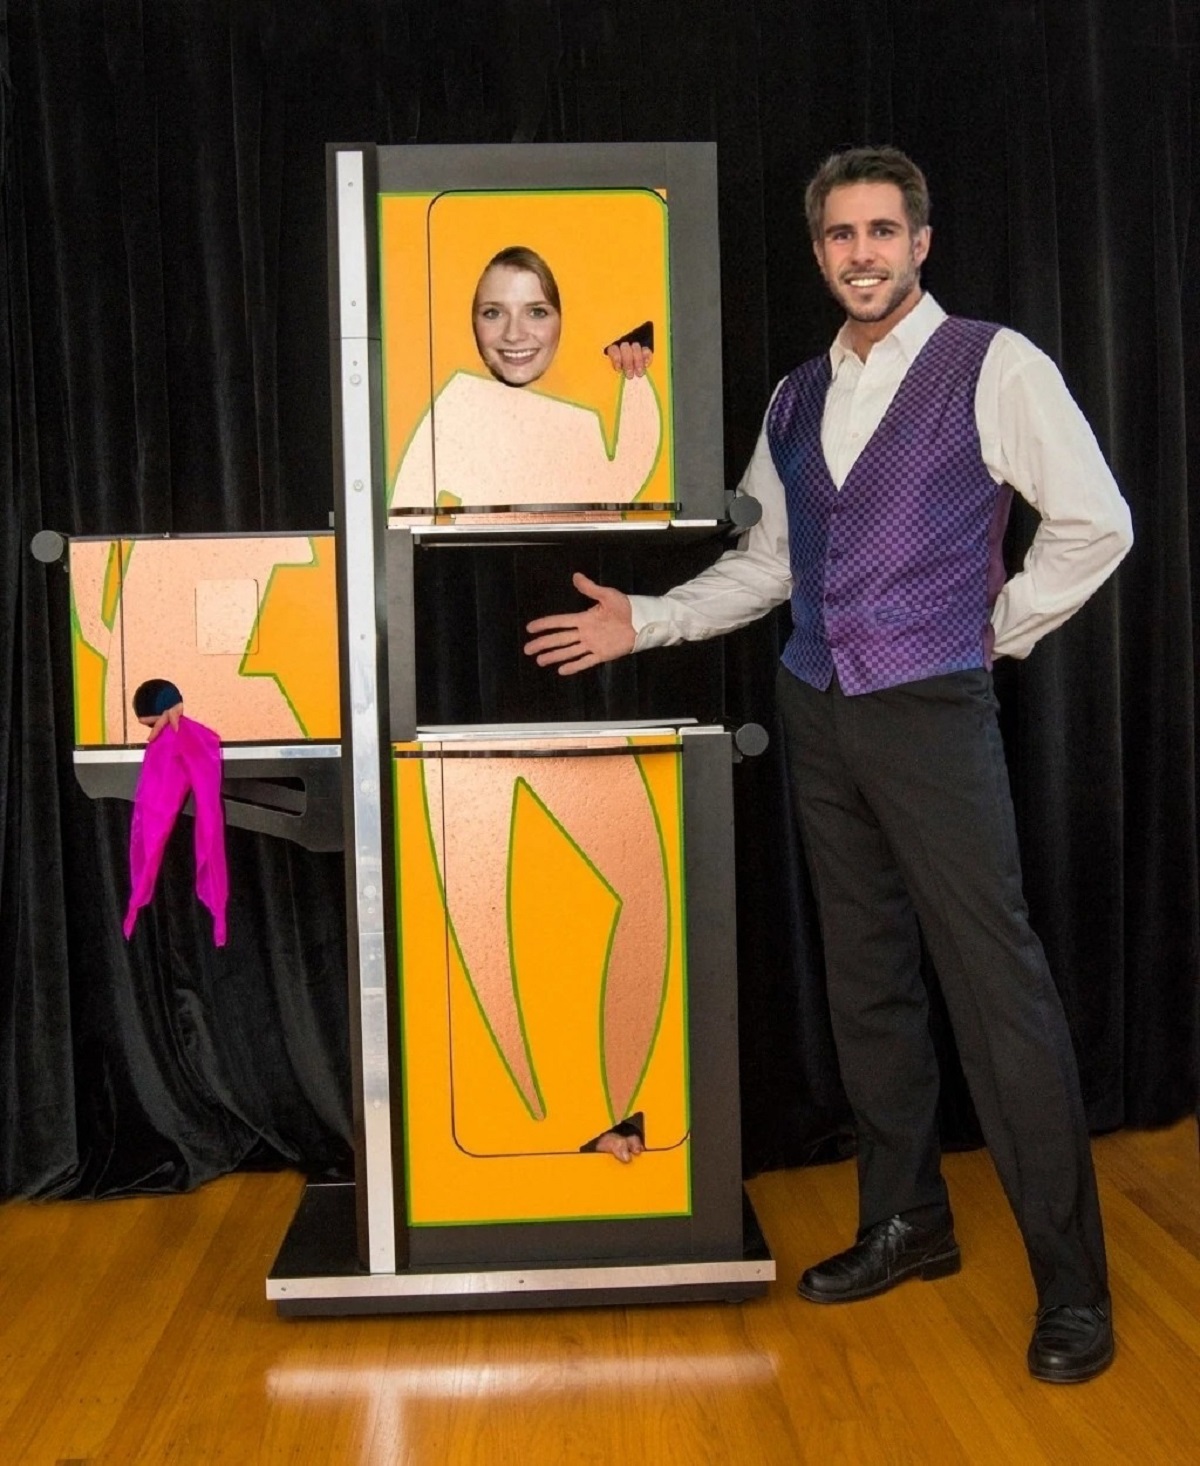 The zig-zag box, a captivating magic show staple, consistently mesmerizes audiences. In this illusion, the magician places an assistant inside an upright box with three sections. Closing the box, the magician shifts the middle section aside, creating the illusion of the assistant's dismemberment. To dispel mirror suspicions, the magician places his head in the vacated section. Fortunately, no actual dismemberment occurs; the flexible assistant contorts her body to fit the zig-zag shape, sticking hands and feet through holes for a convincing illusion.